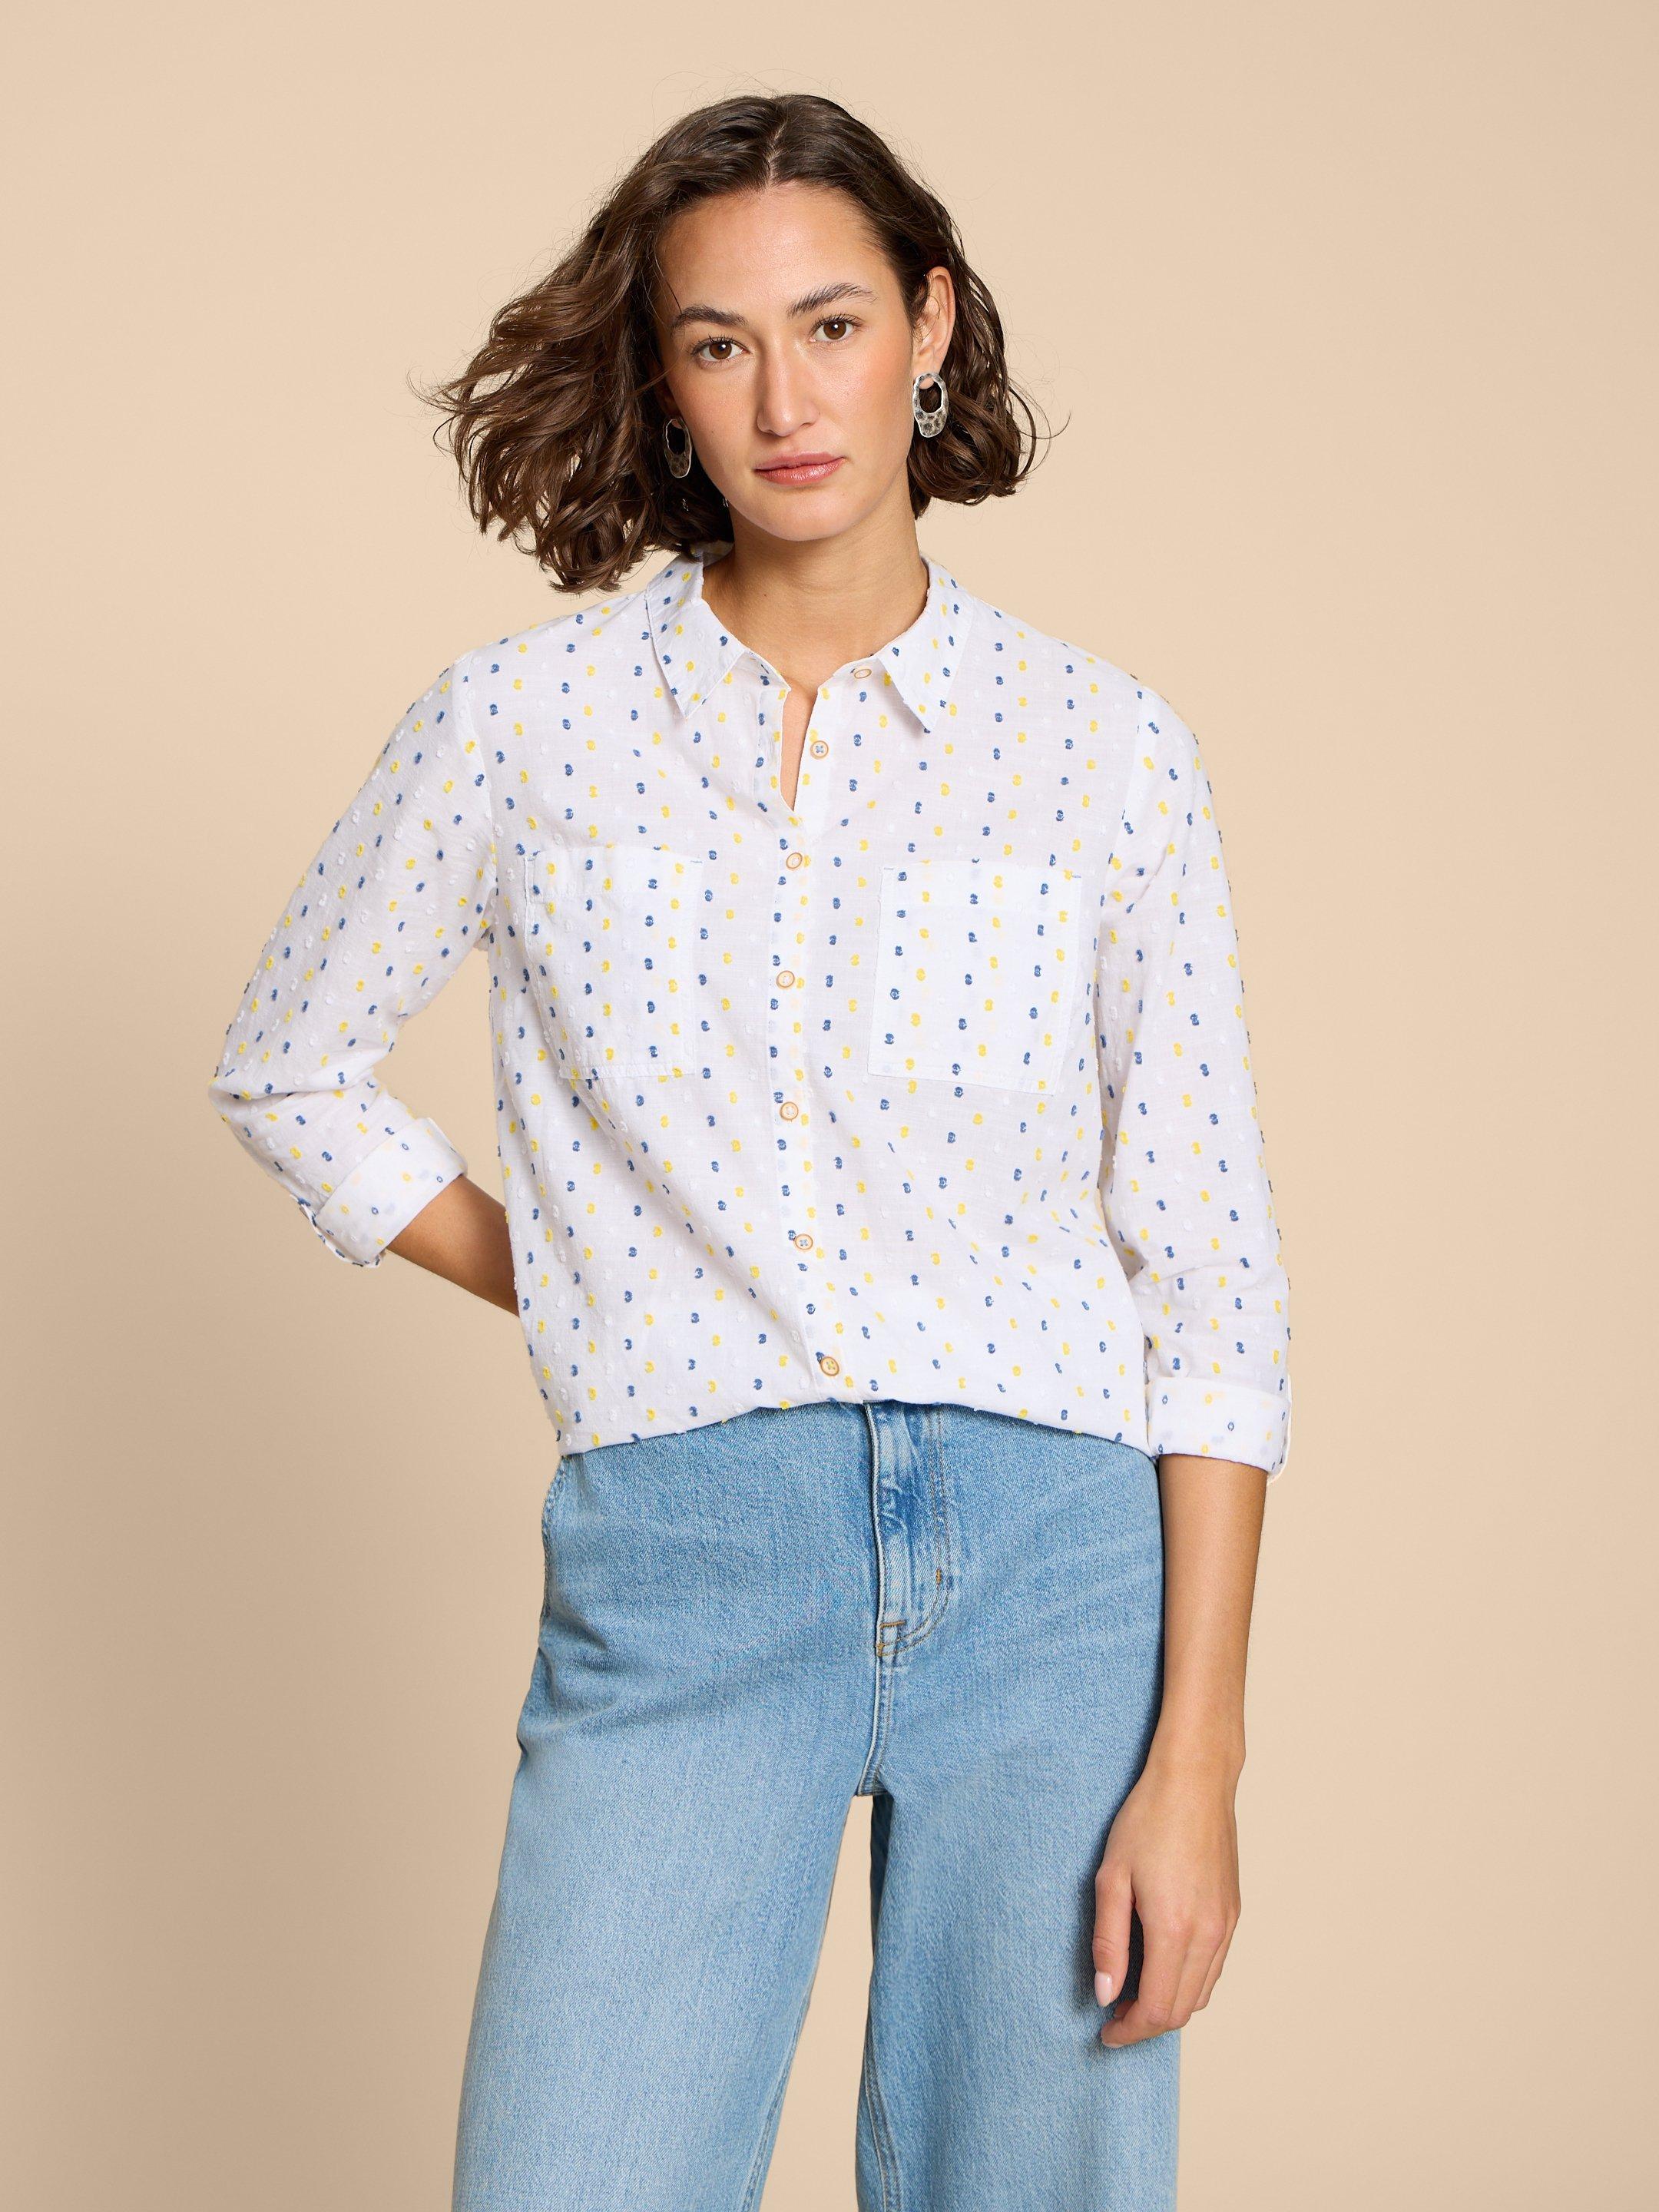 SOPHIE TEXTURED ORGANIC SHIRT in IVORY MLT - LIFESTYLE